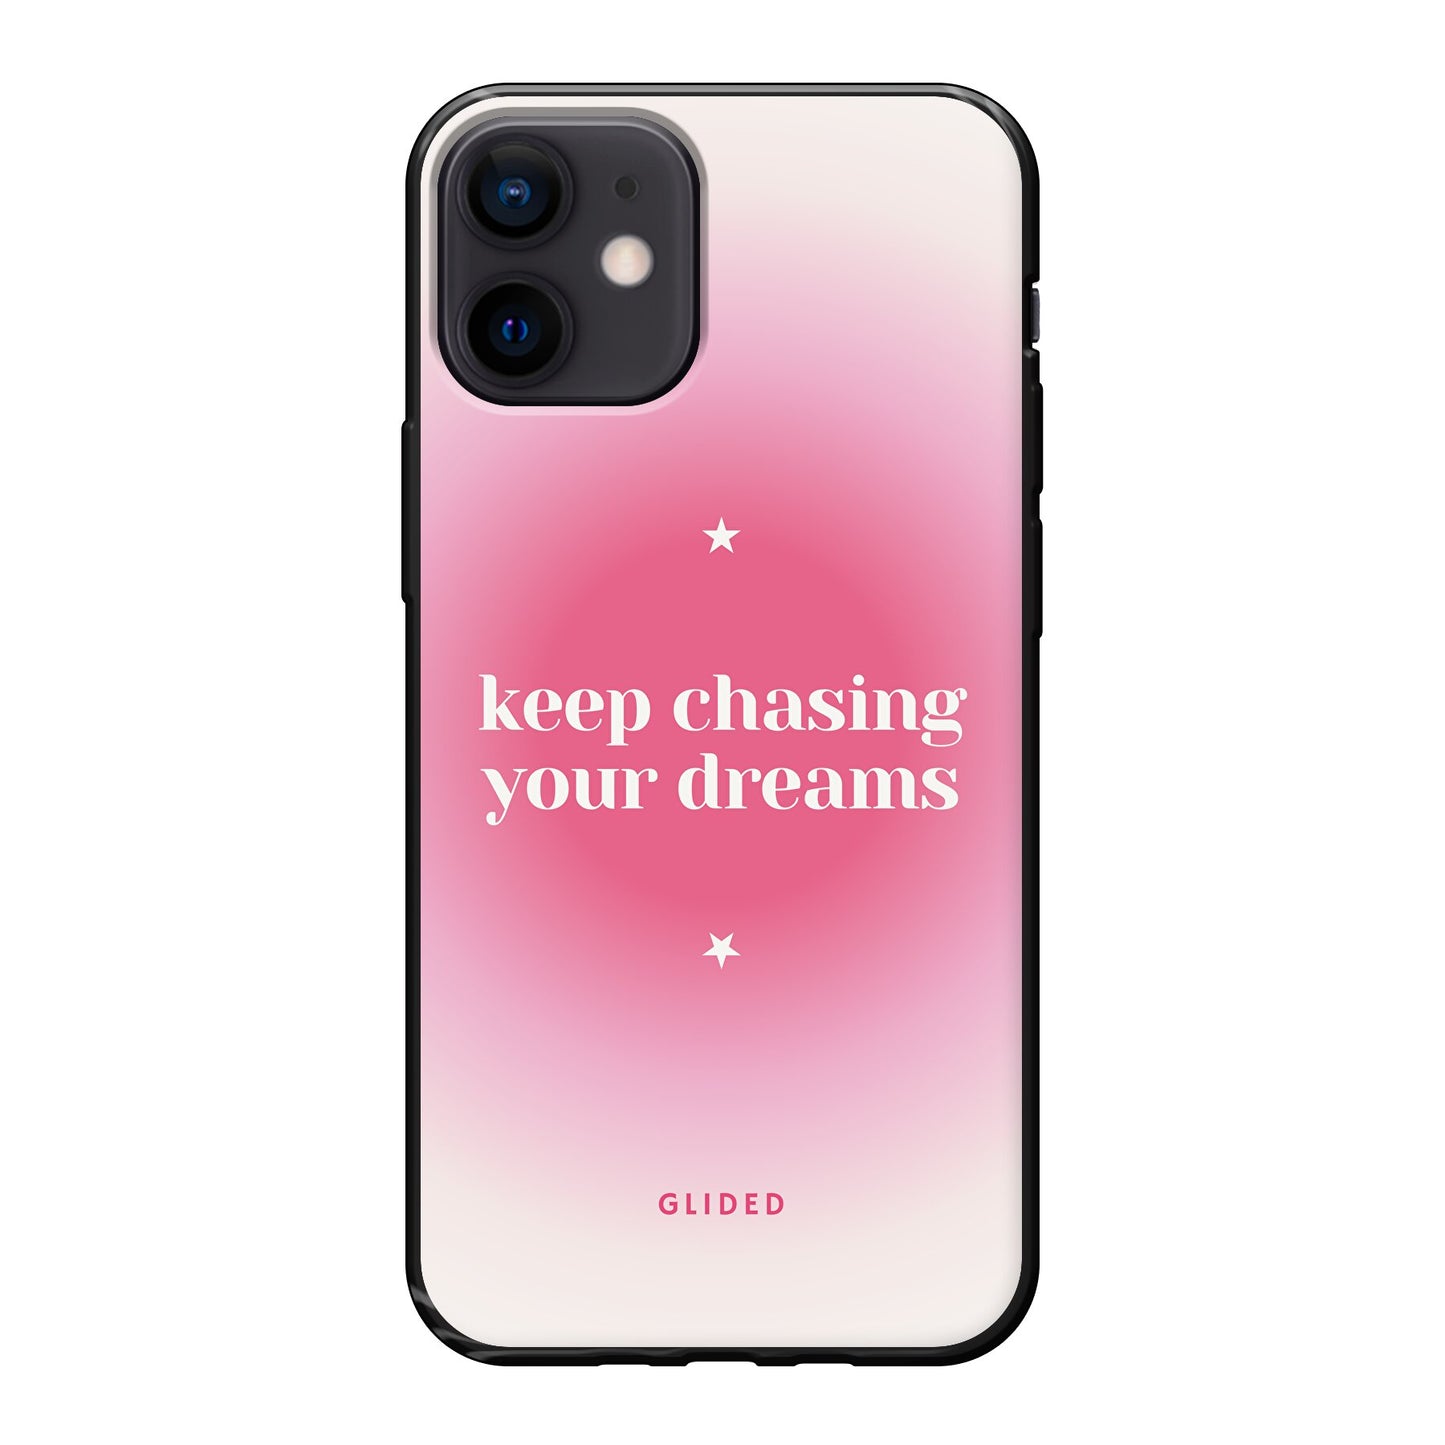 Chasing Dreams - iPhone 12 mini Handyhülle Soft case